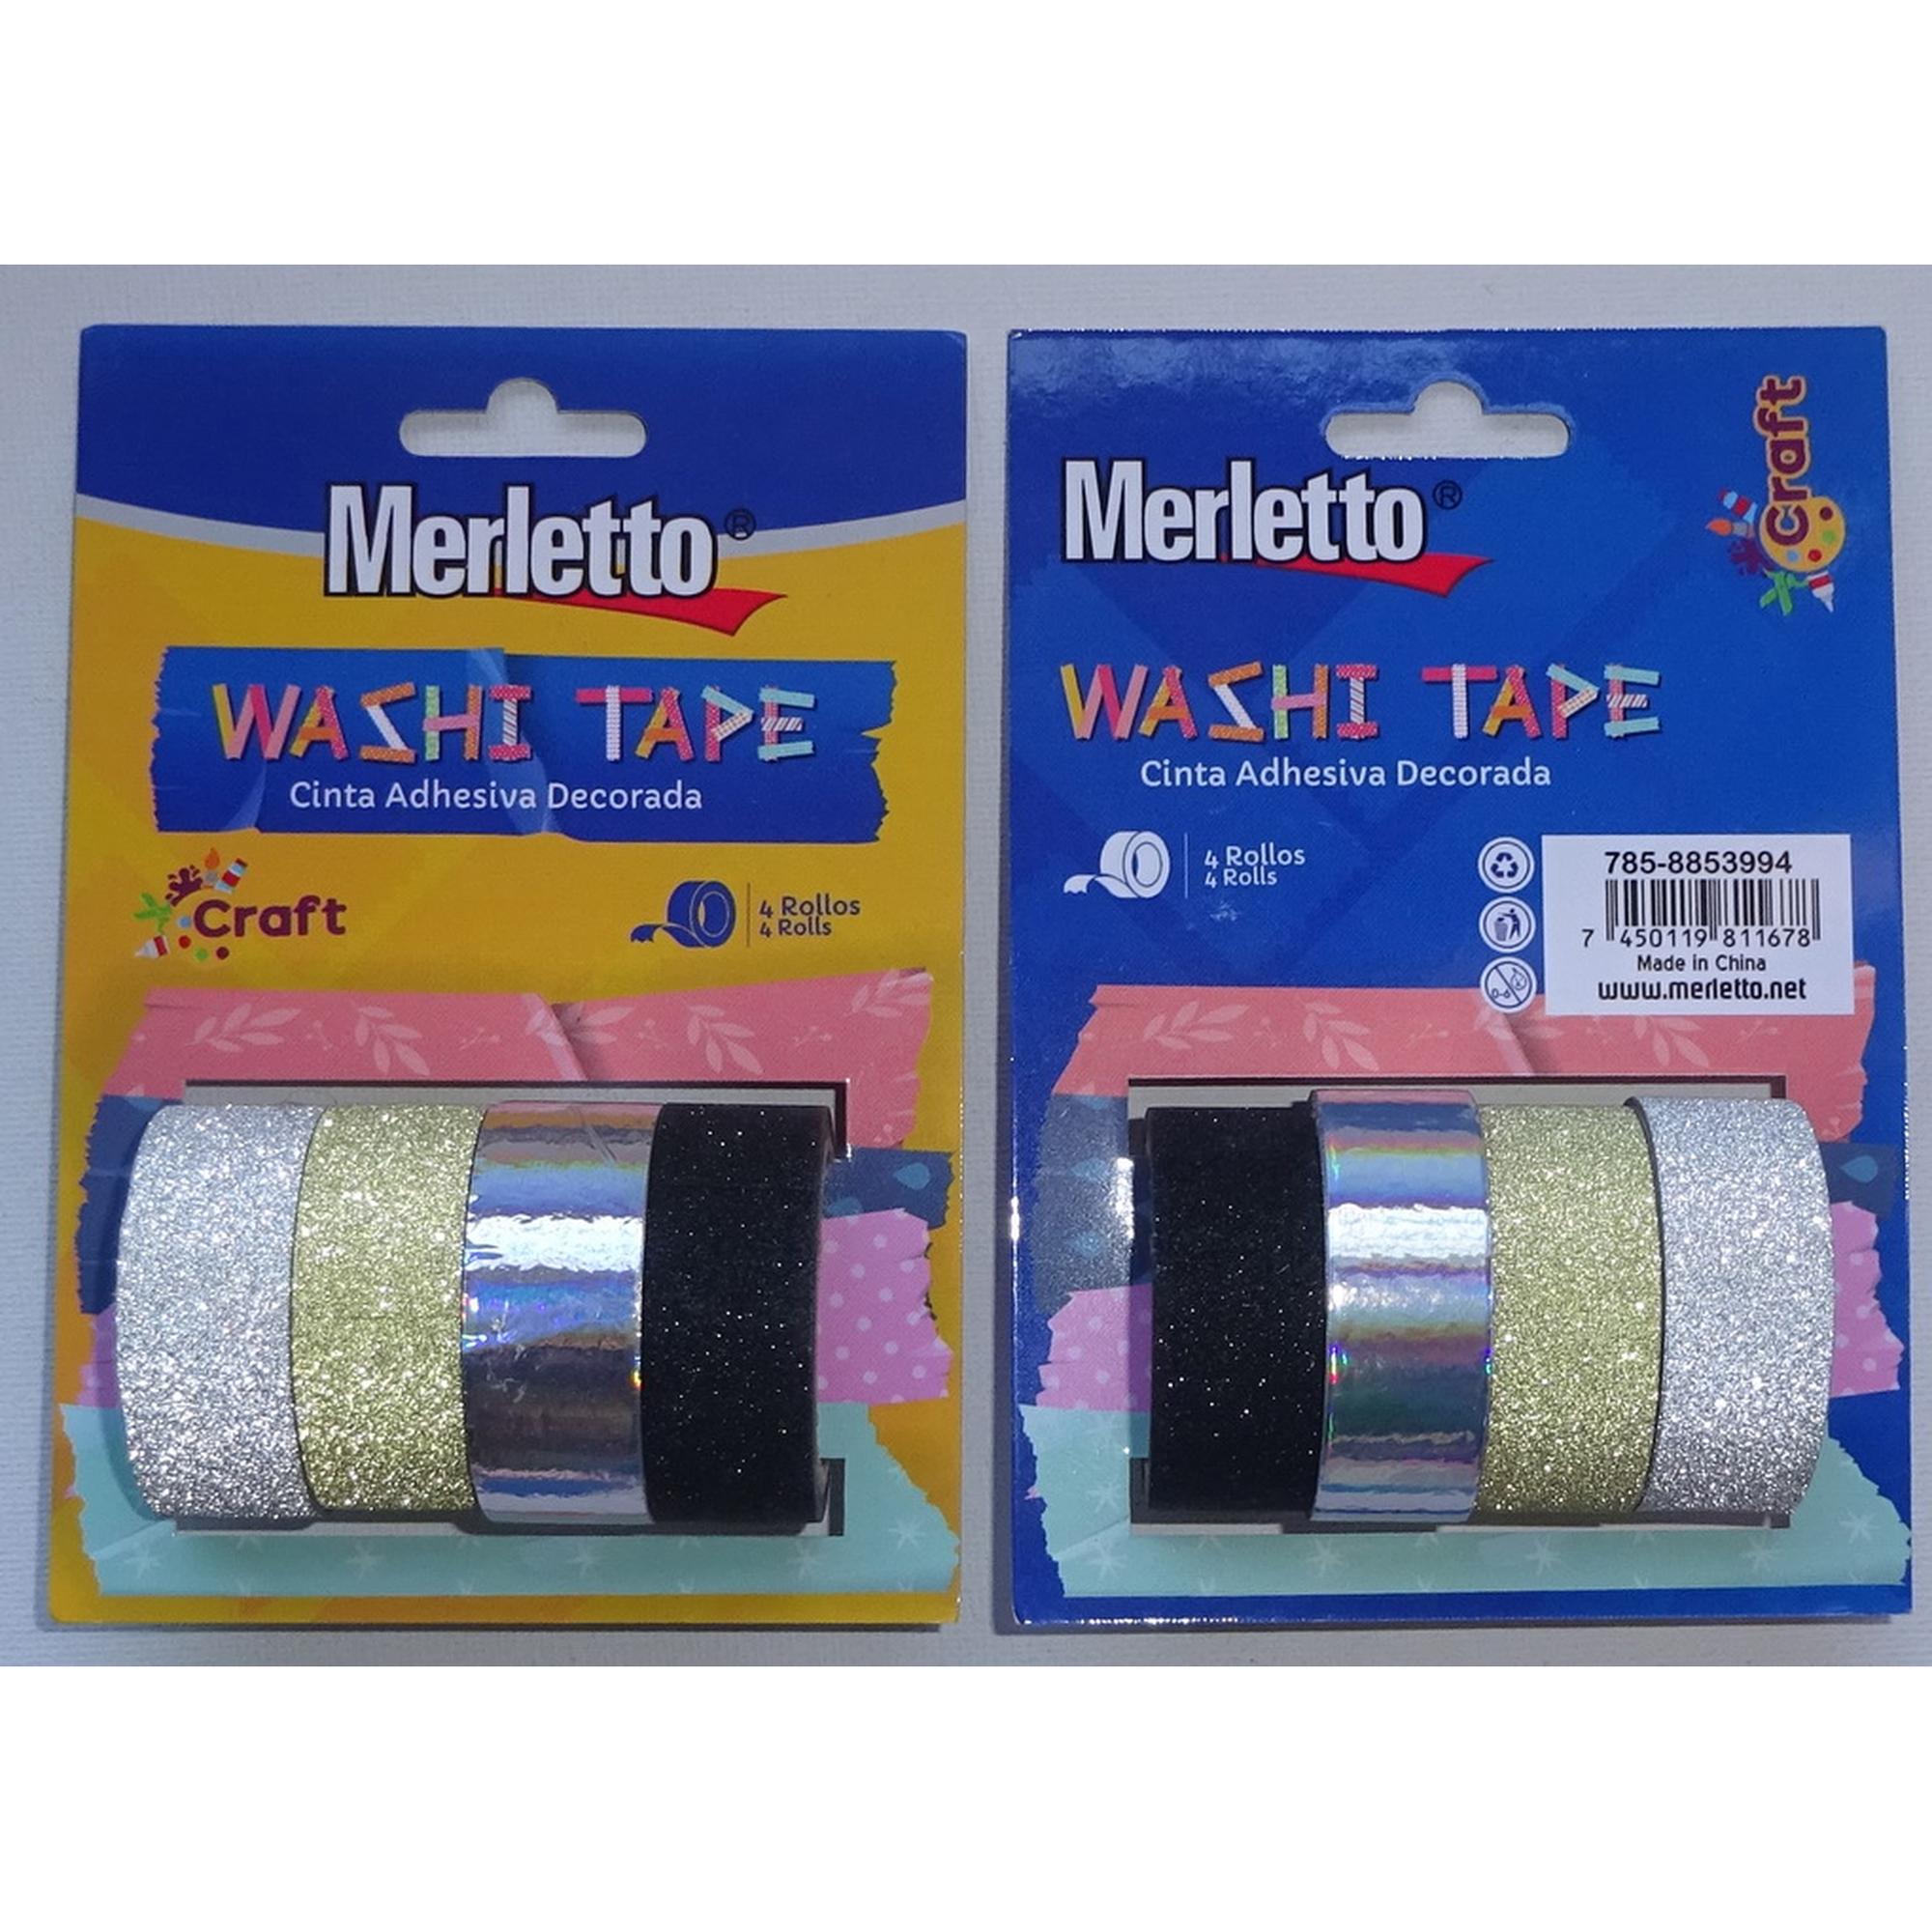 SET OF 4 ASSORTED WASHI TAPES ROLLS - 785-8853994